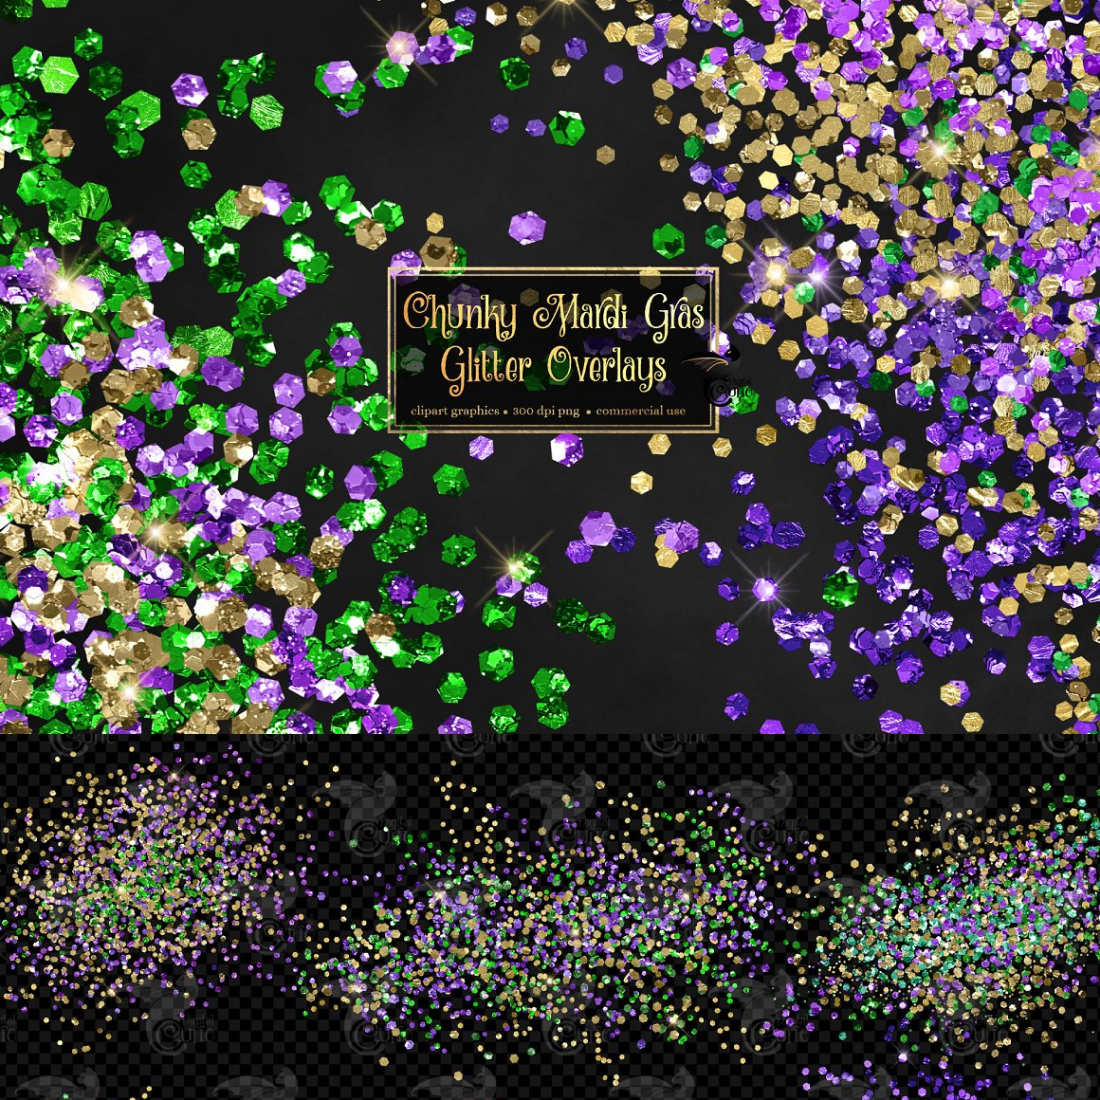 Images with chunky mardi gras glitter overlays.